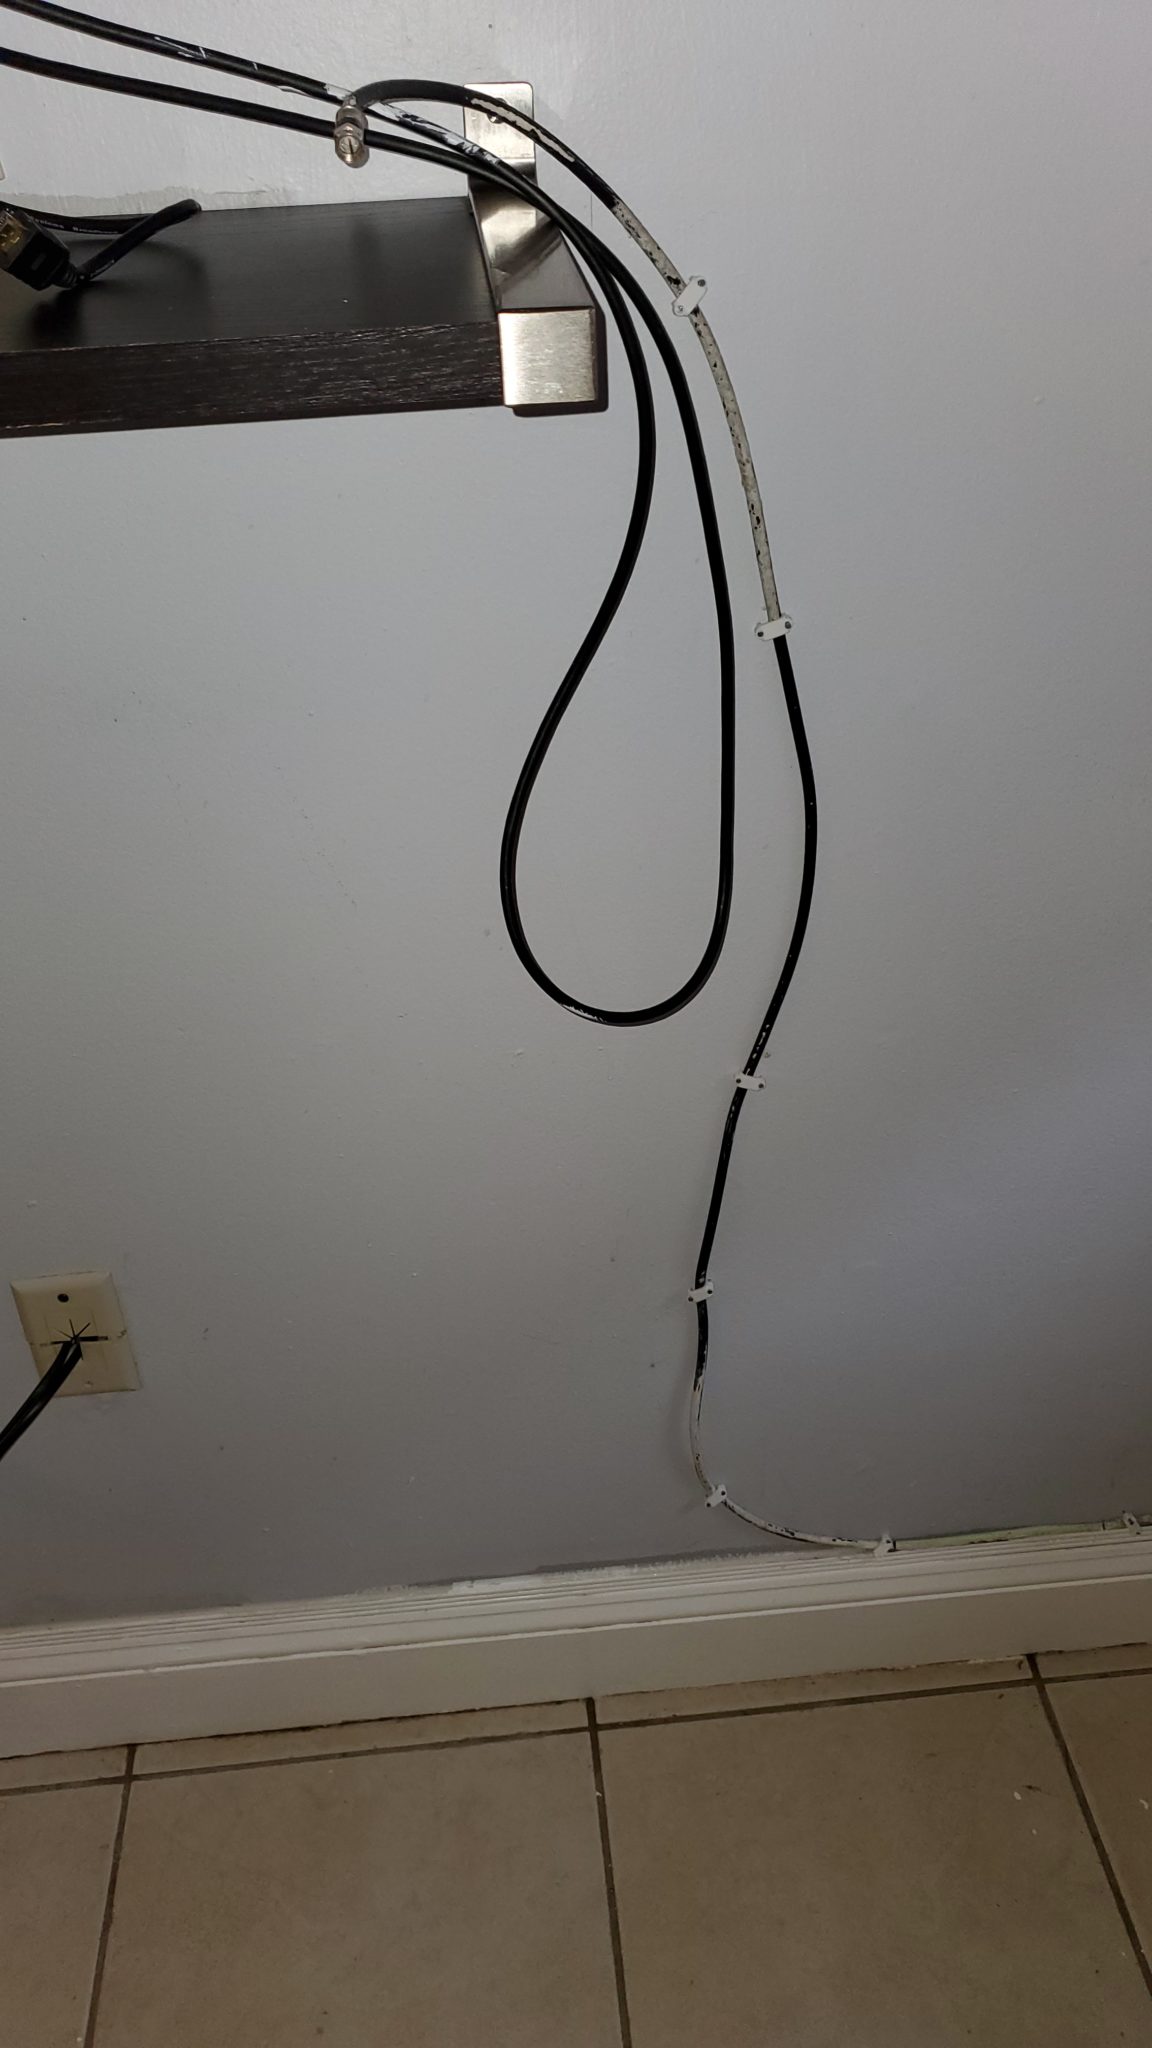 Inappropriate cable wire installation